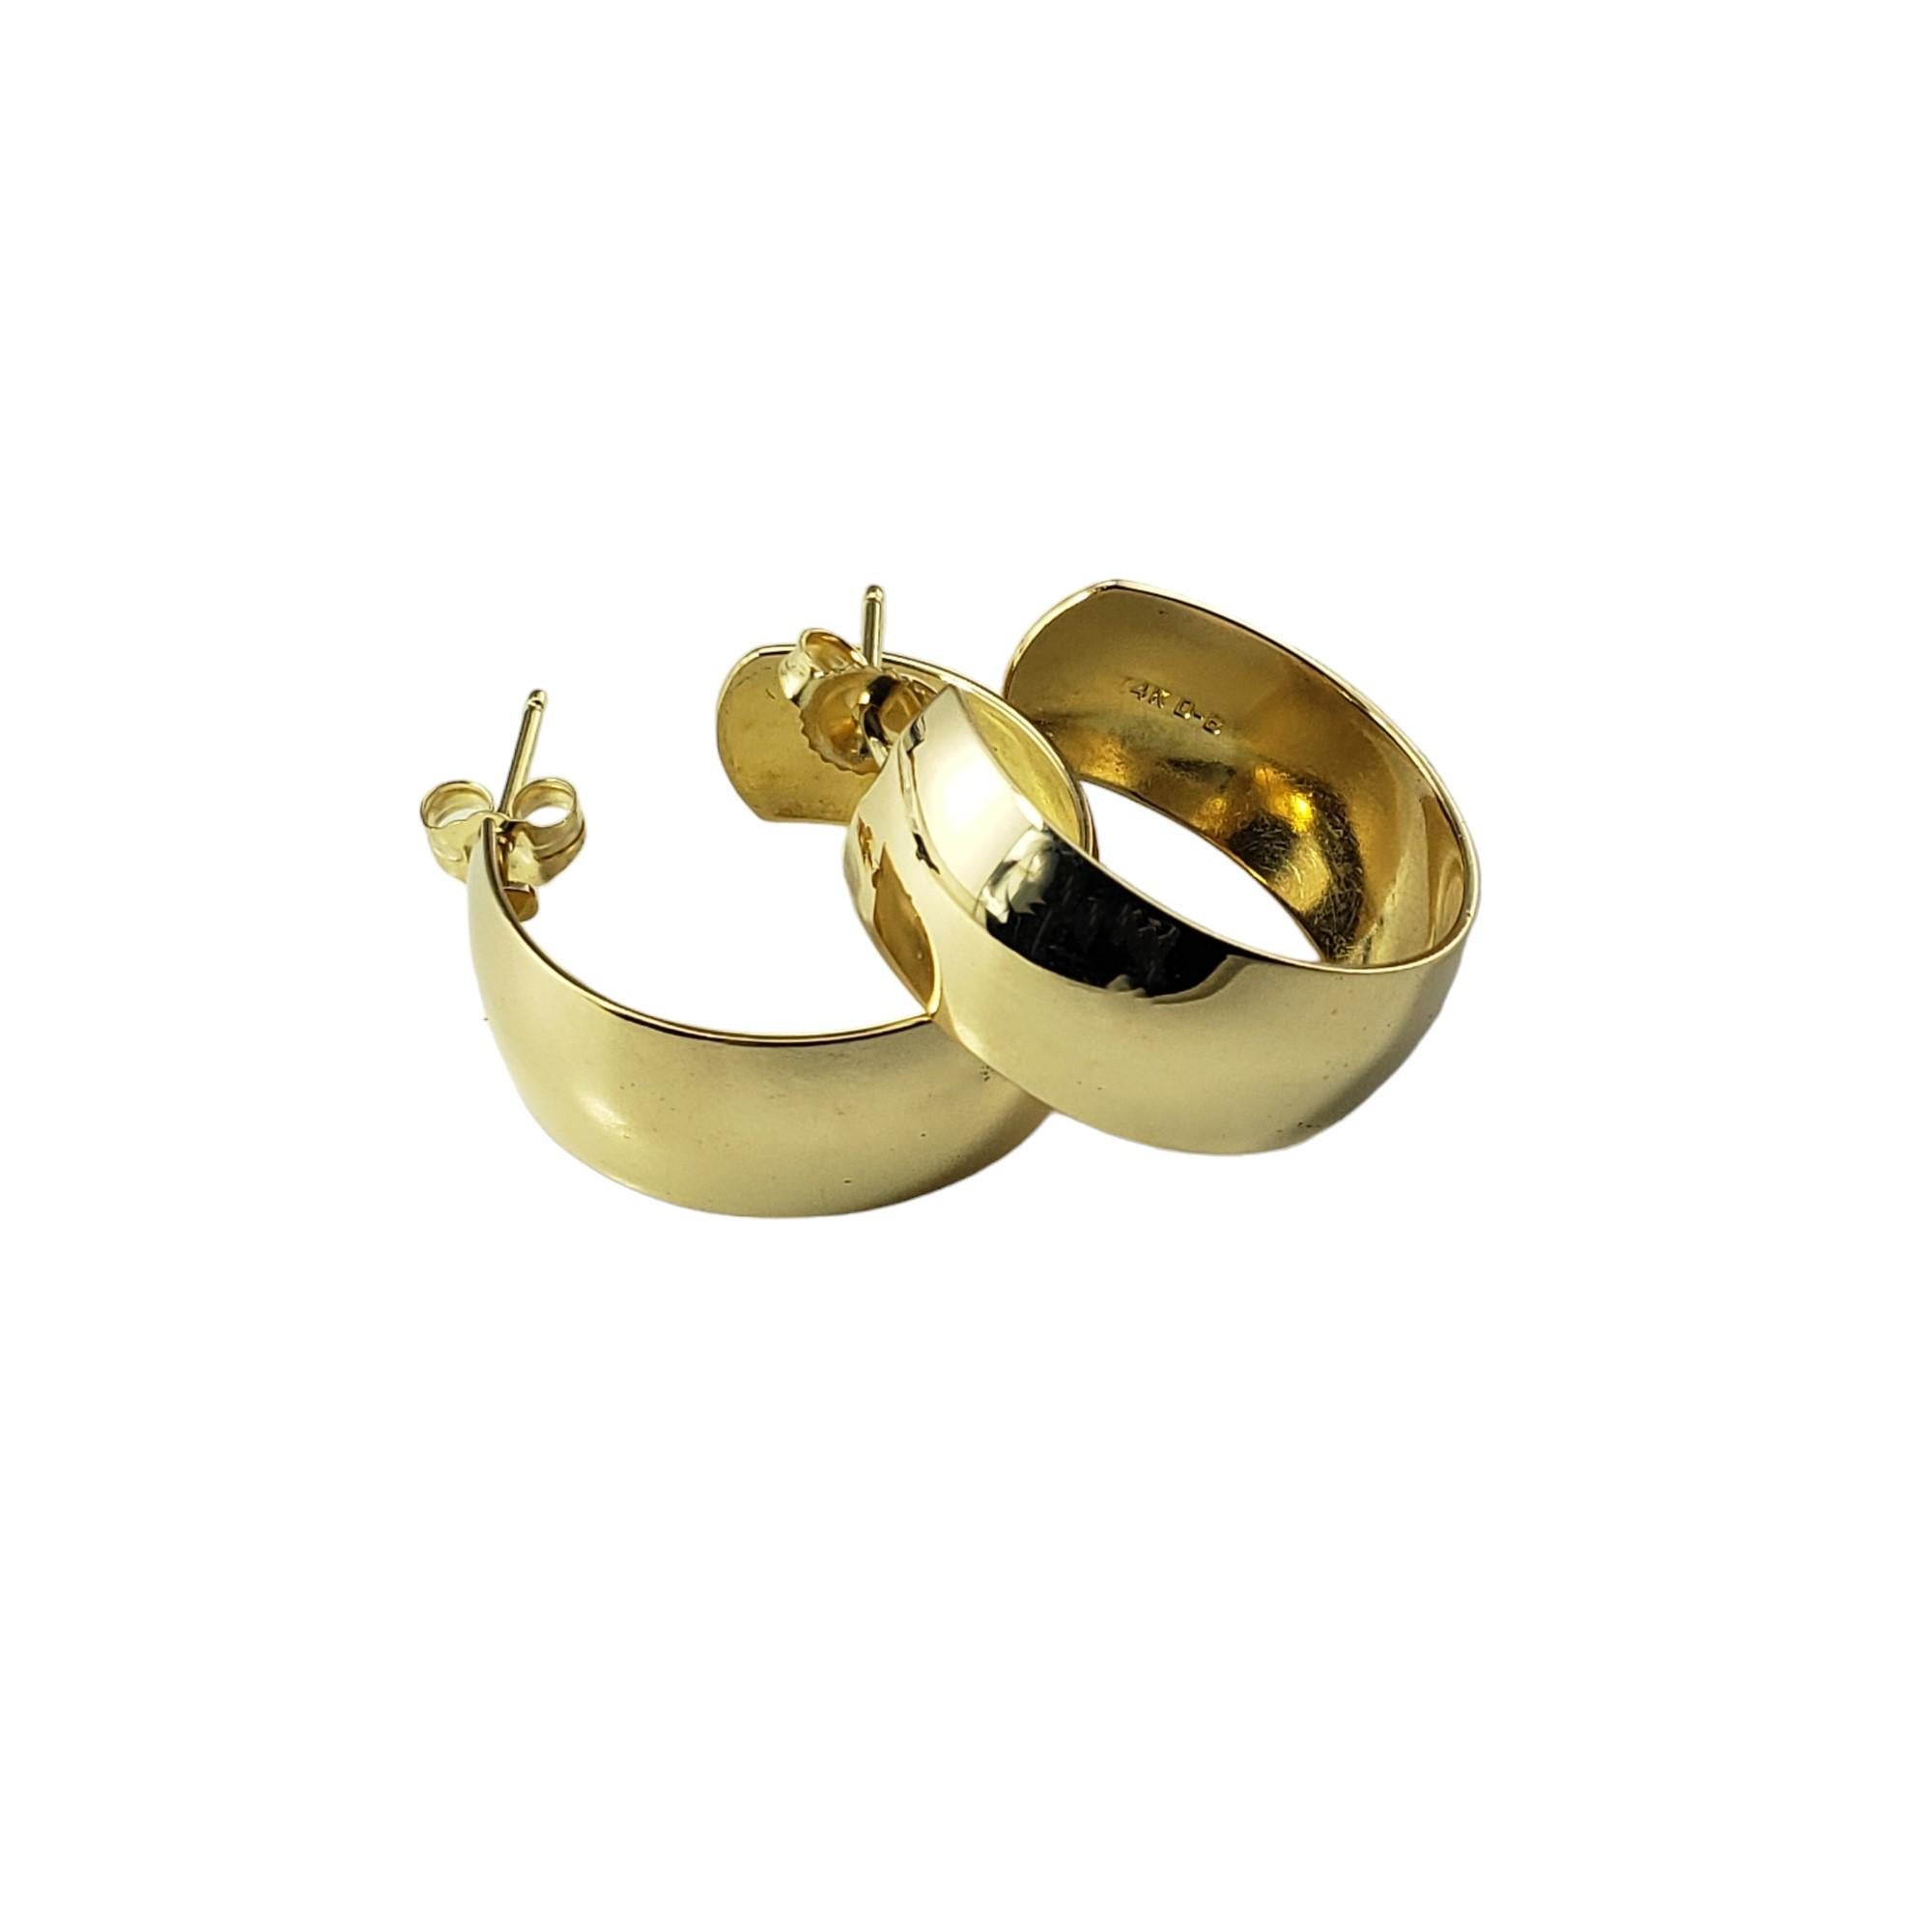 Vintage 14K Yellow Gold Hoop Earrings-

These elegant hoop earrings are crafted in meticulously detailed 14K polished yellow gold.  Width: 9 mm

Size: 24 mm x 9 mm

Stamped: 14K

Weight: 8.4 gr./ 5.4 dwt

Very good condition, professionally